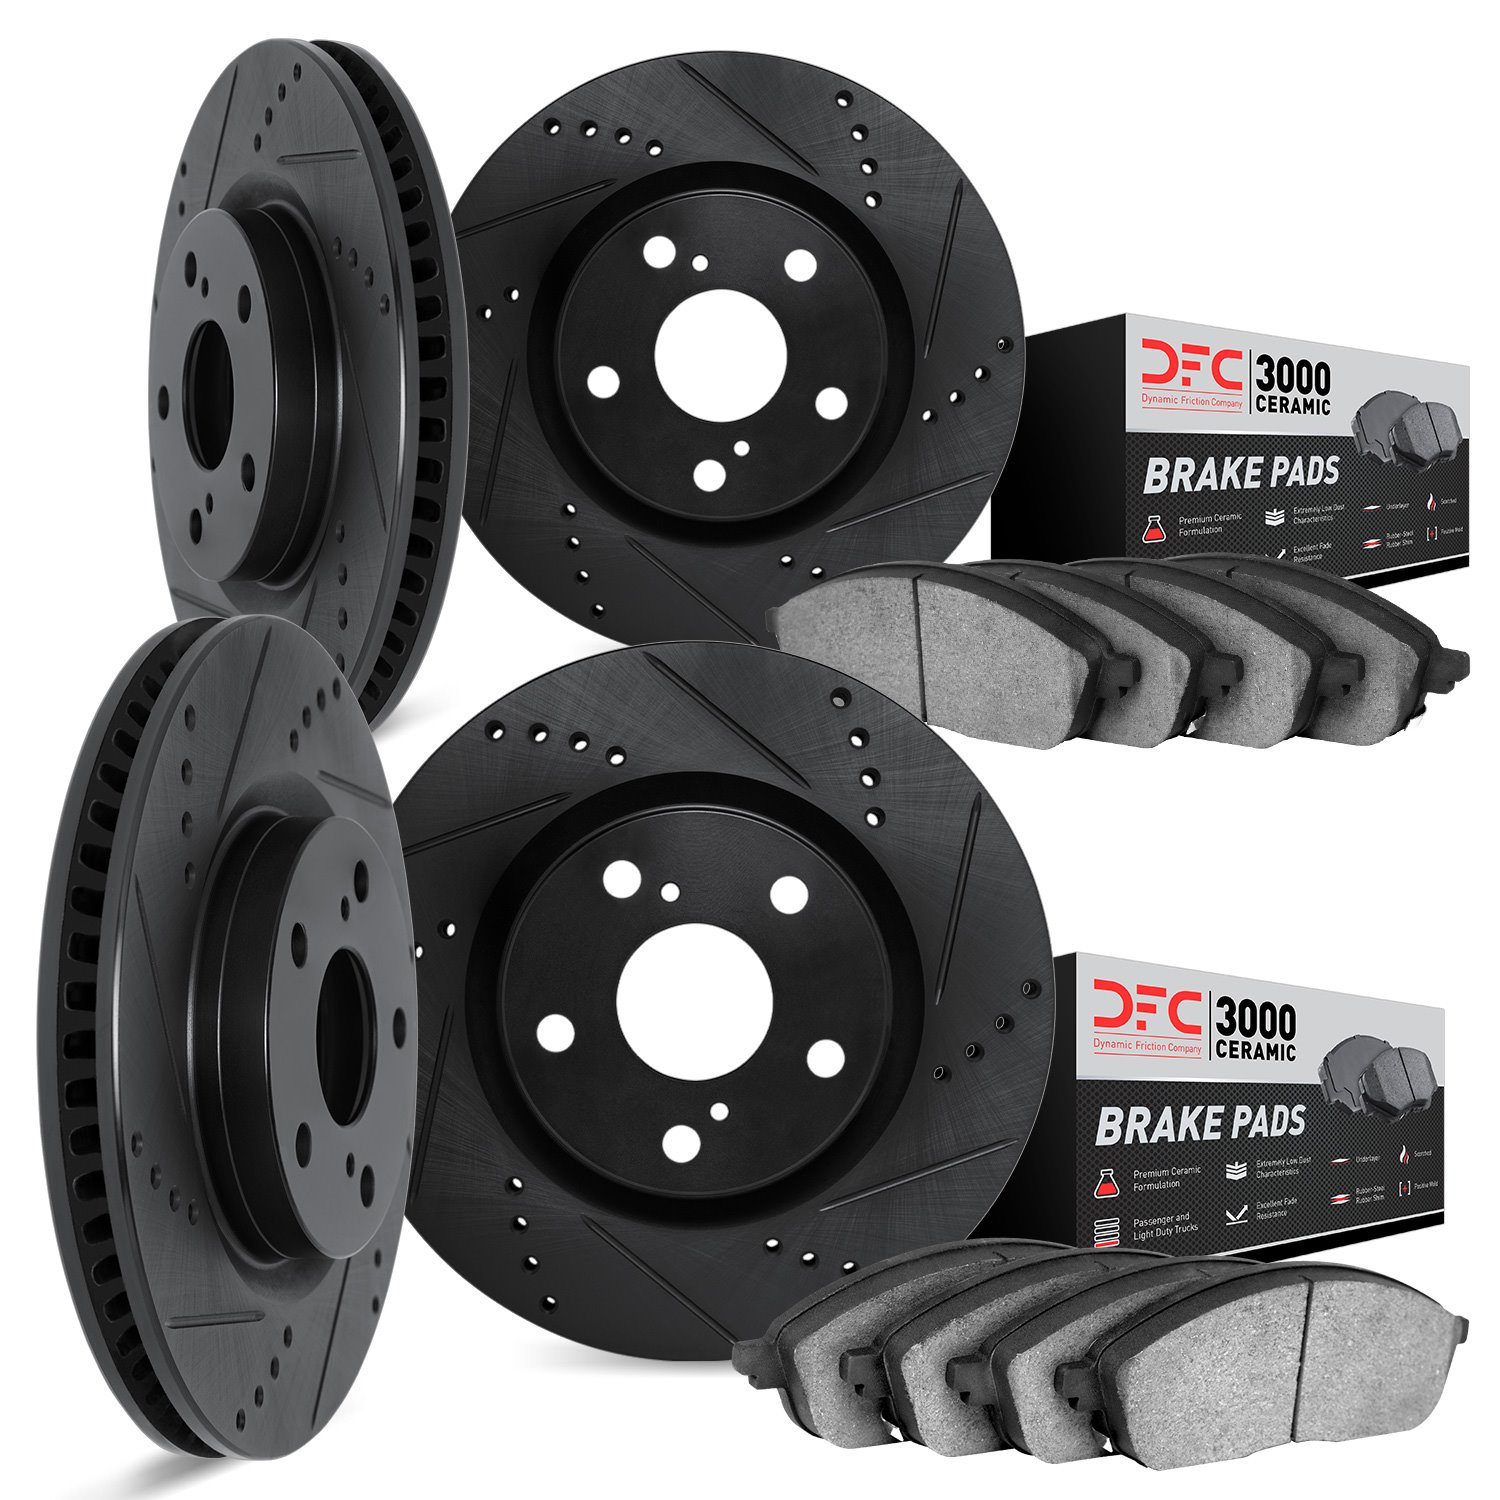 8304-02010 Drilled/Slotted Brake Rotors with 3000-Series Ceramic Brake Pads Kit [Black], 1986-1991 Porsche, Position: Front and